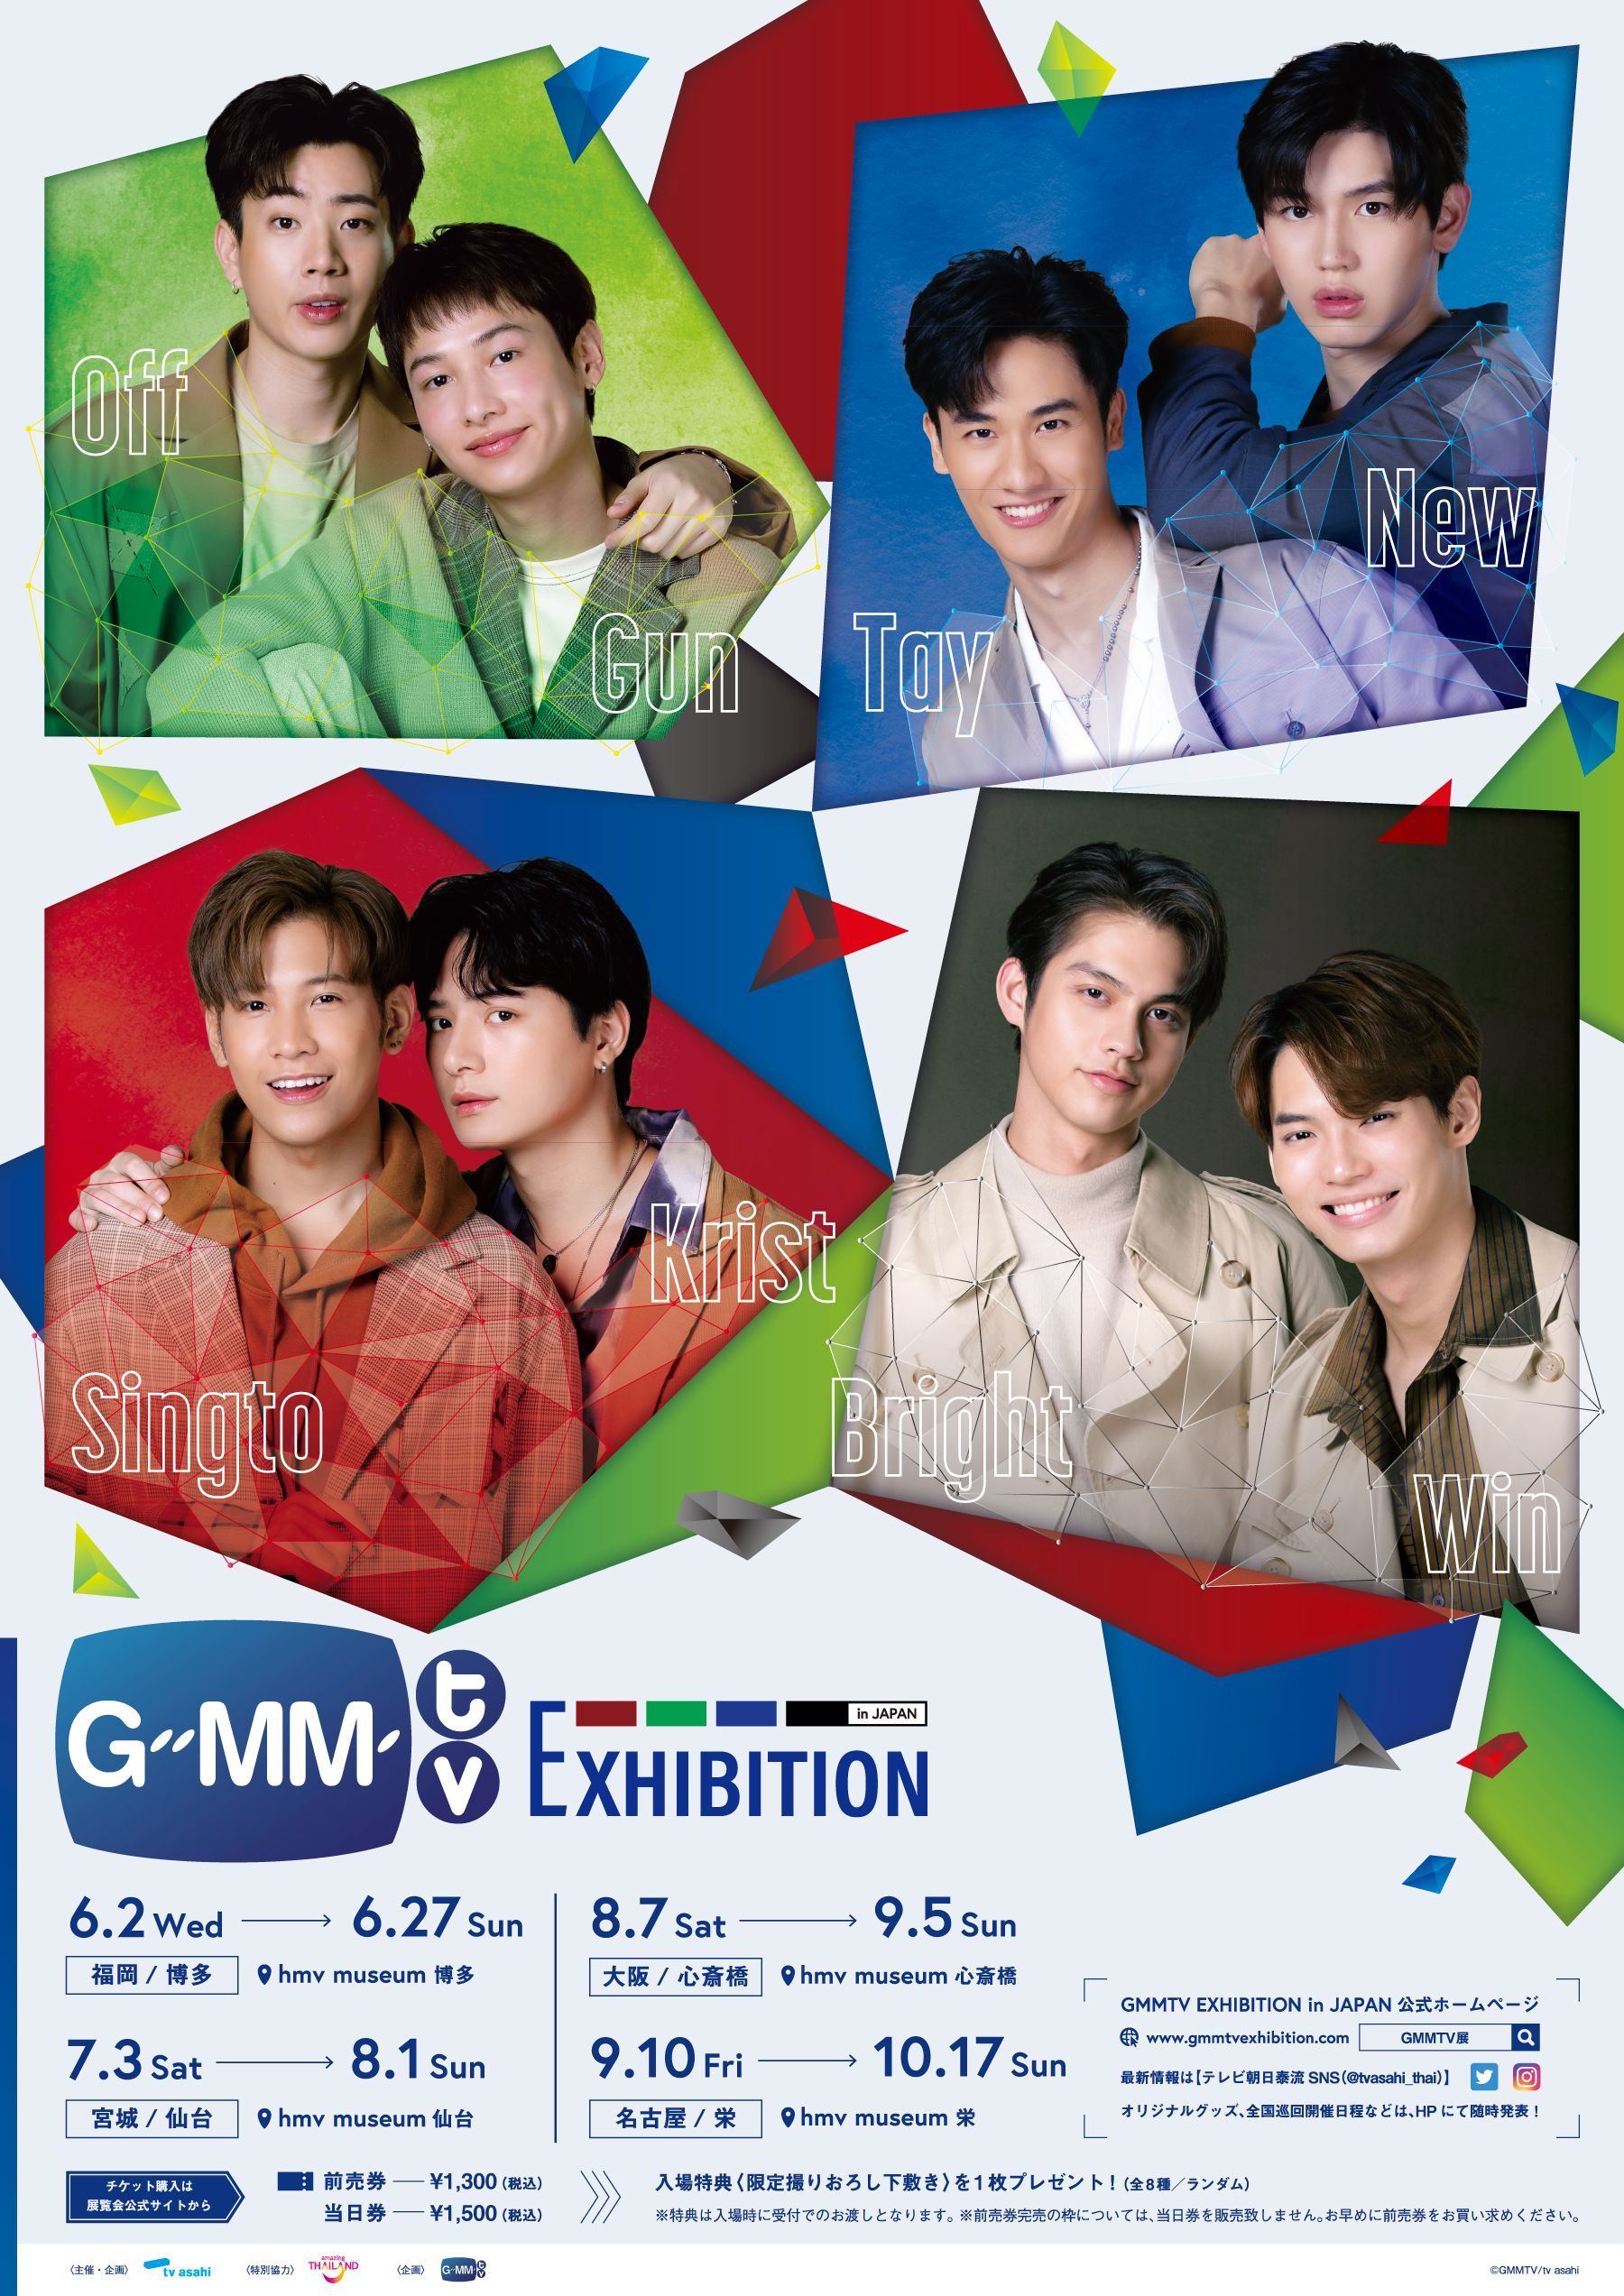 『GMMTV EXHIBITION in JAPAN』